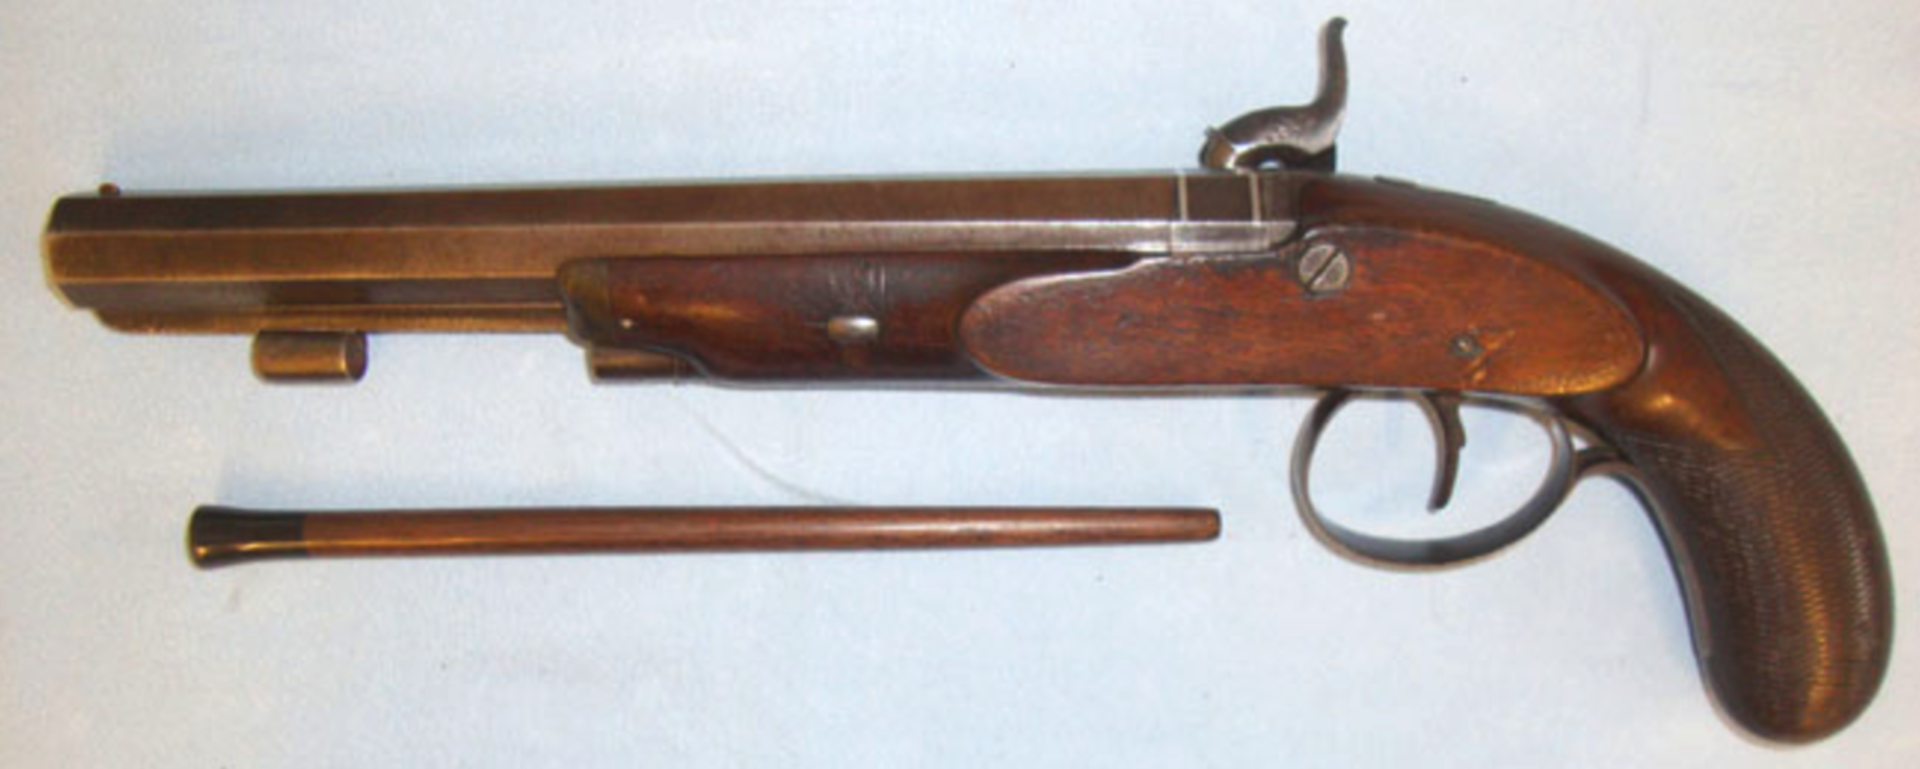 1840 – 1842 English .60” Bore Percussion Pistol (Converted From Flintlock) By John Crosby Brown